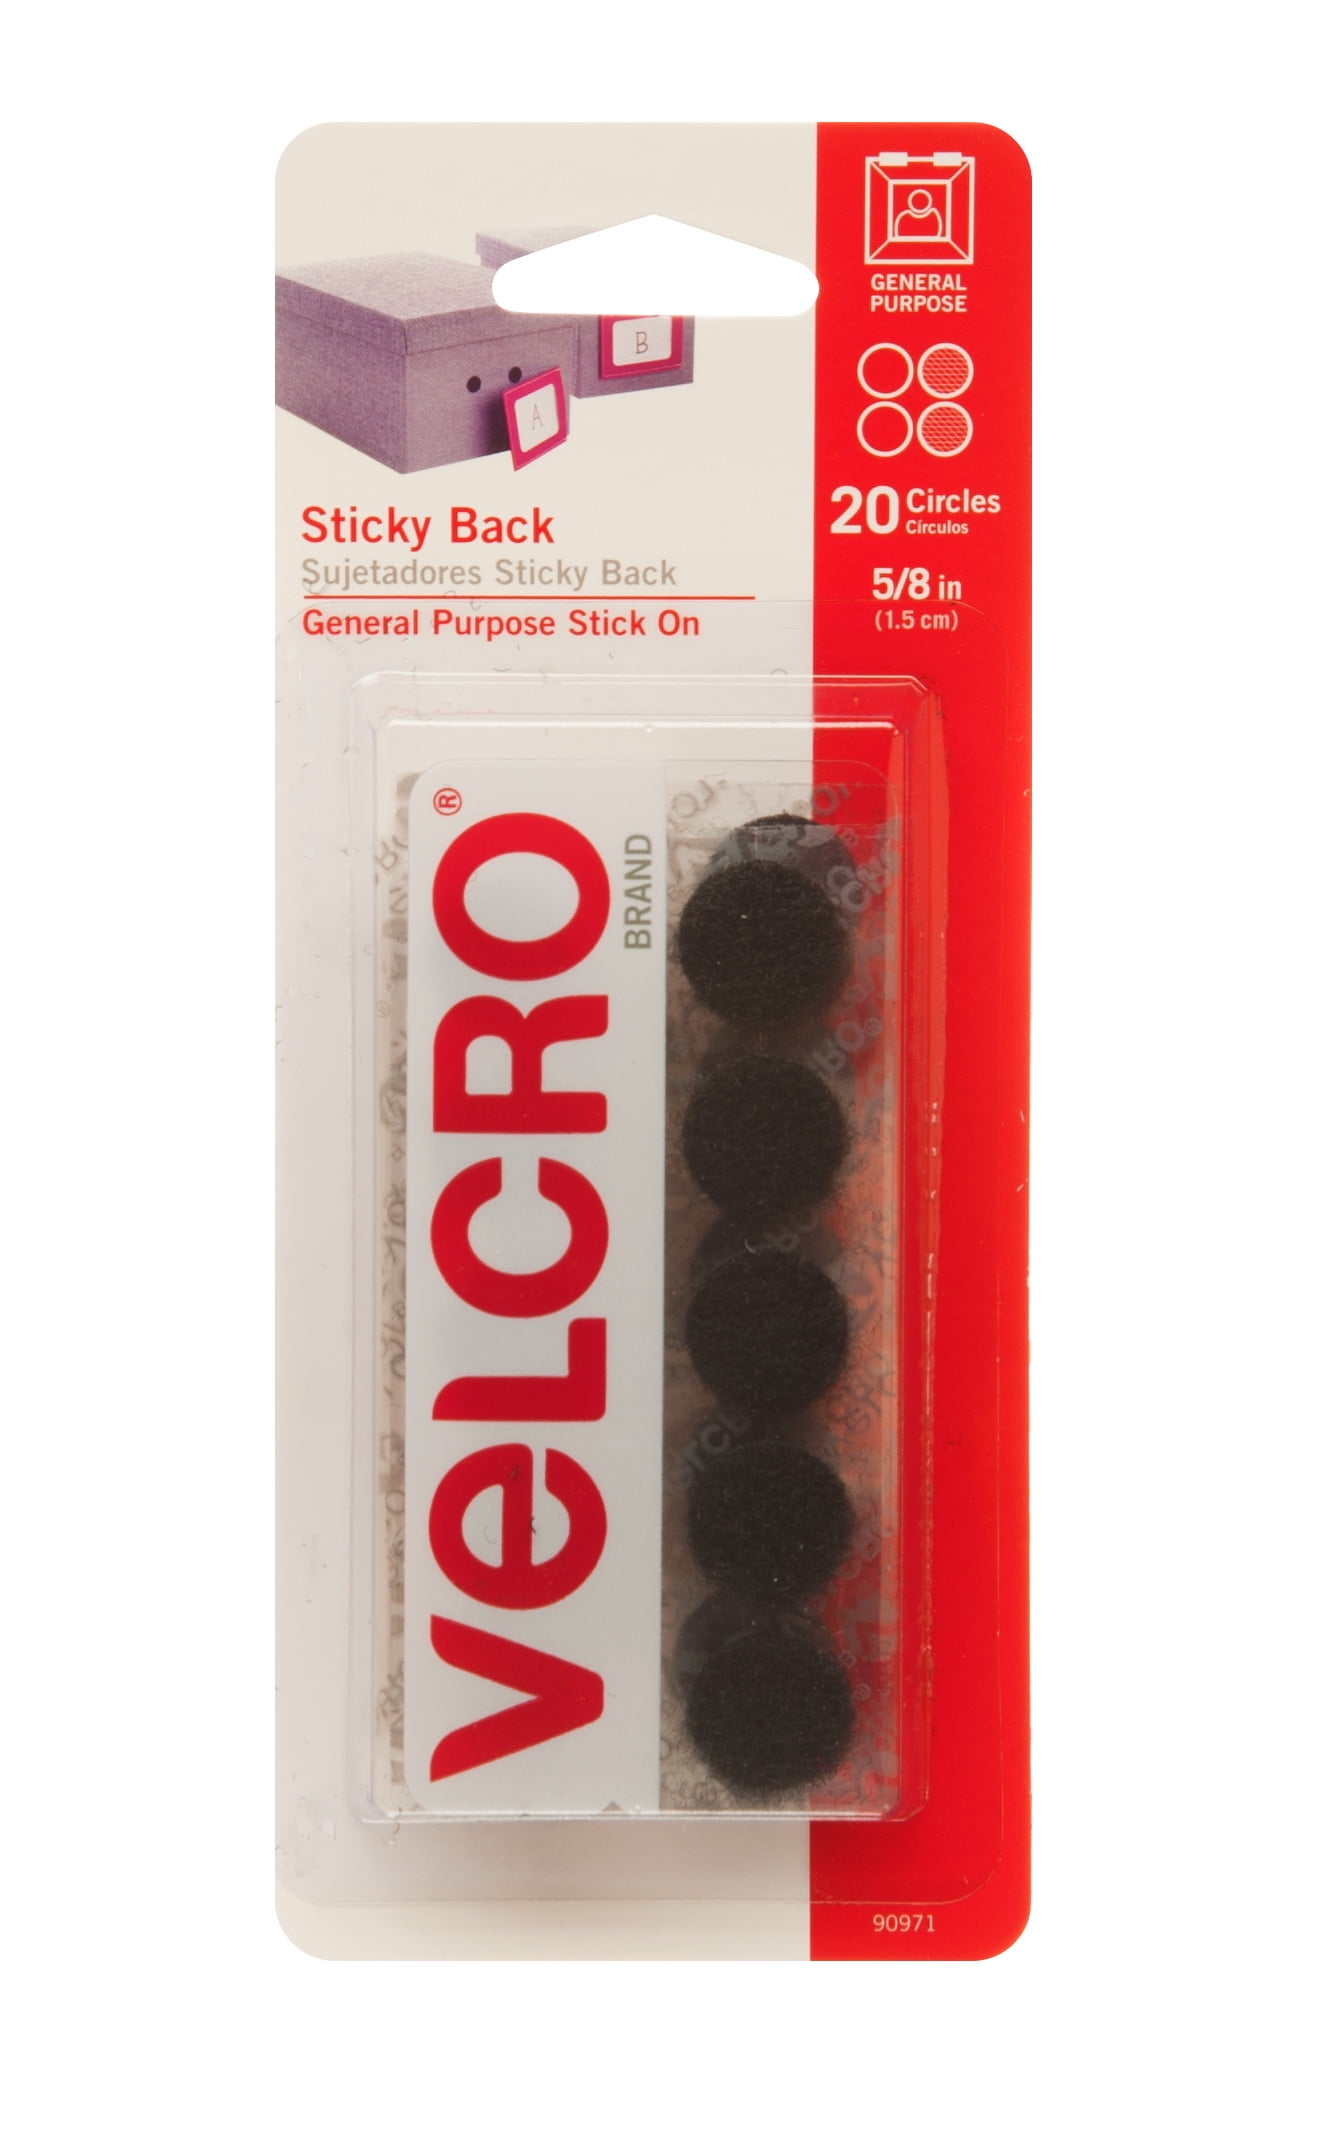 VELCRO Brand Sticky Back Hook and Loop Fasteners, Perfect for Home or Office, 5/8", Pack of 20, Black Coins (90971W)